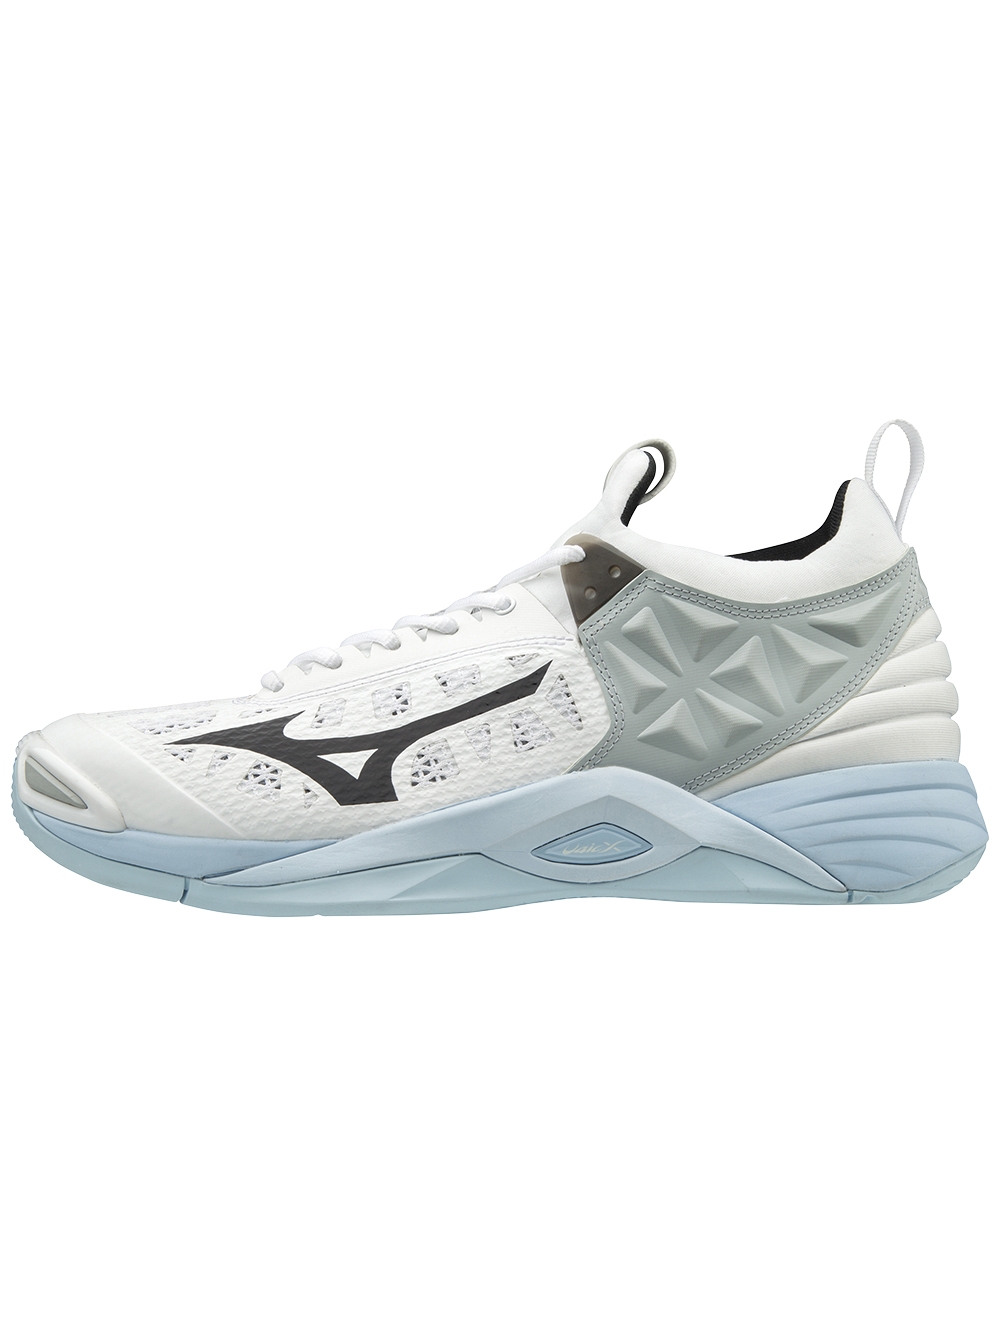 Mizuno Womens Wave Momentum Shoes | Midwest Volleyball Warehouse